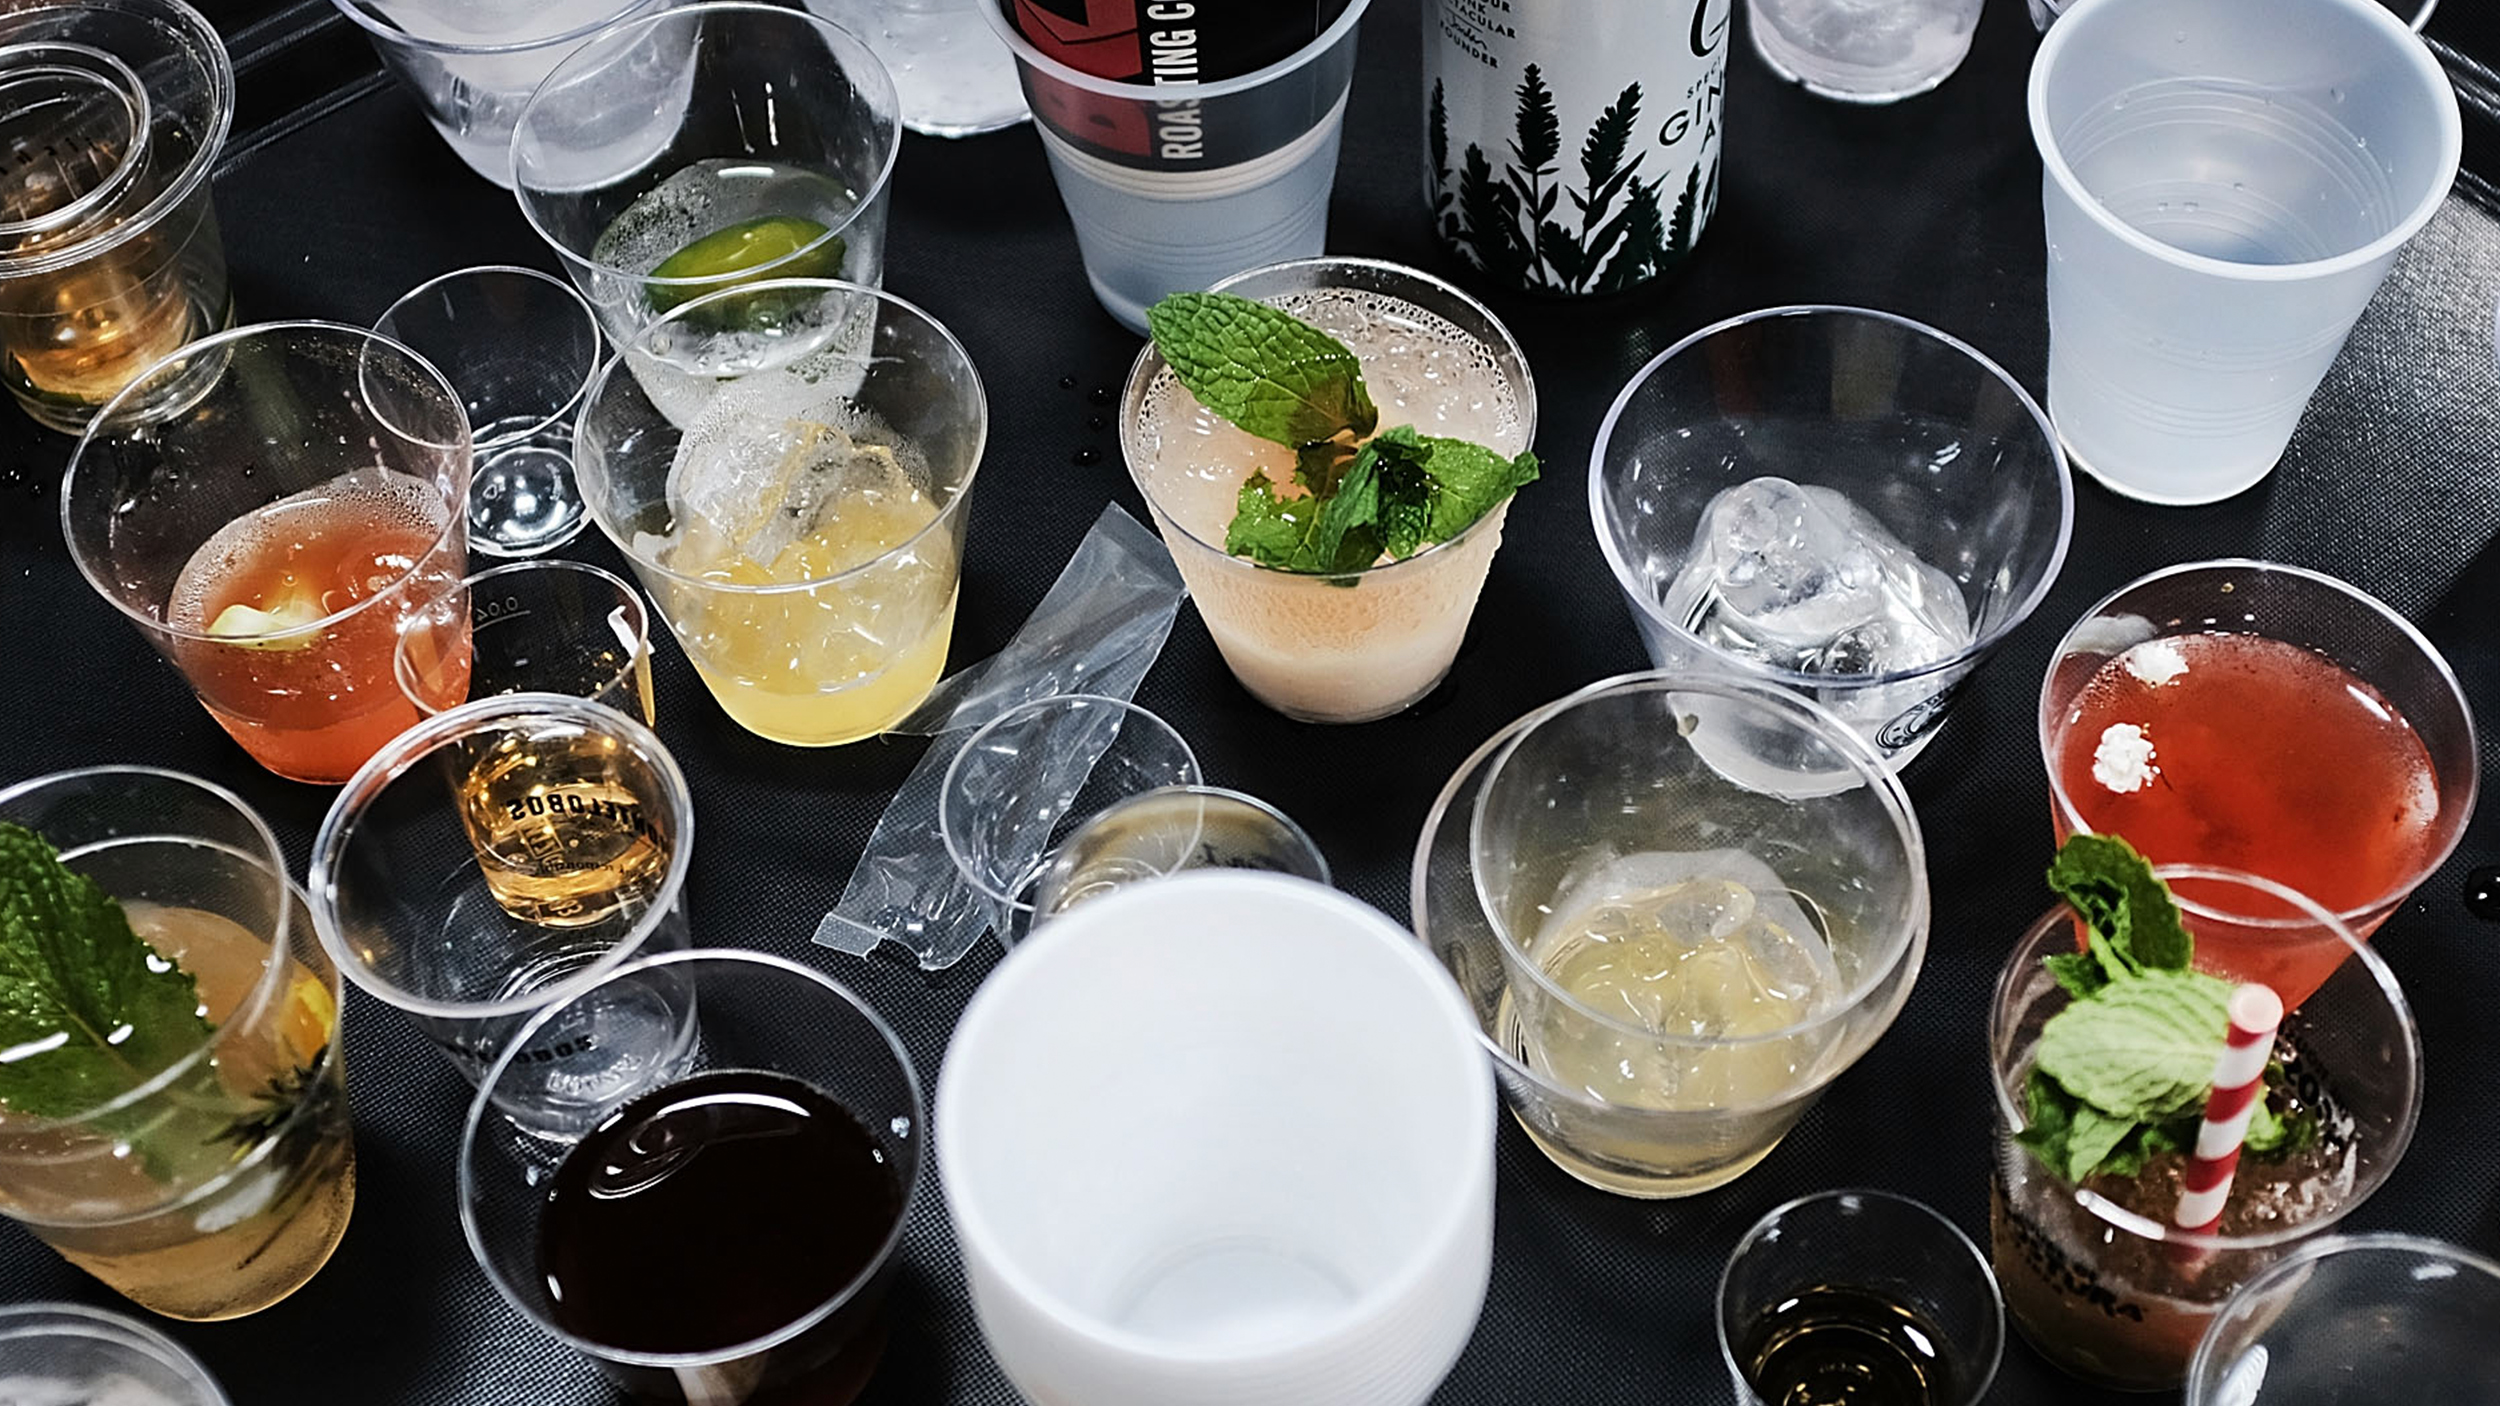 An assortment of half-empty drinks in various plastic cups, some with ice and garnishes, is spread across a dark surface—a telltale sign of the previous night's hangover remedy attempts.